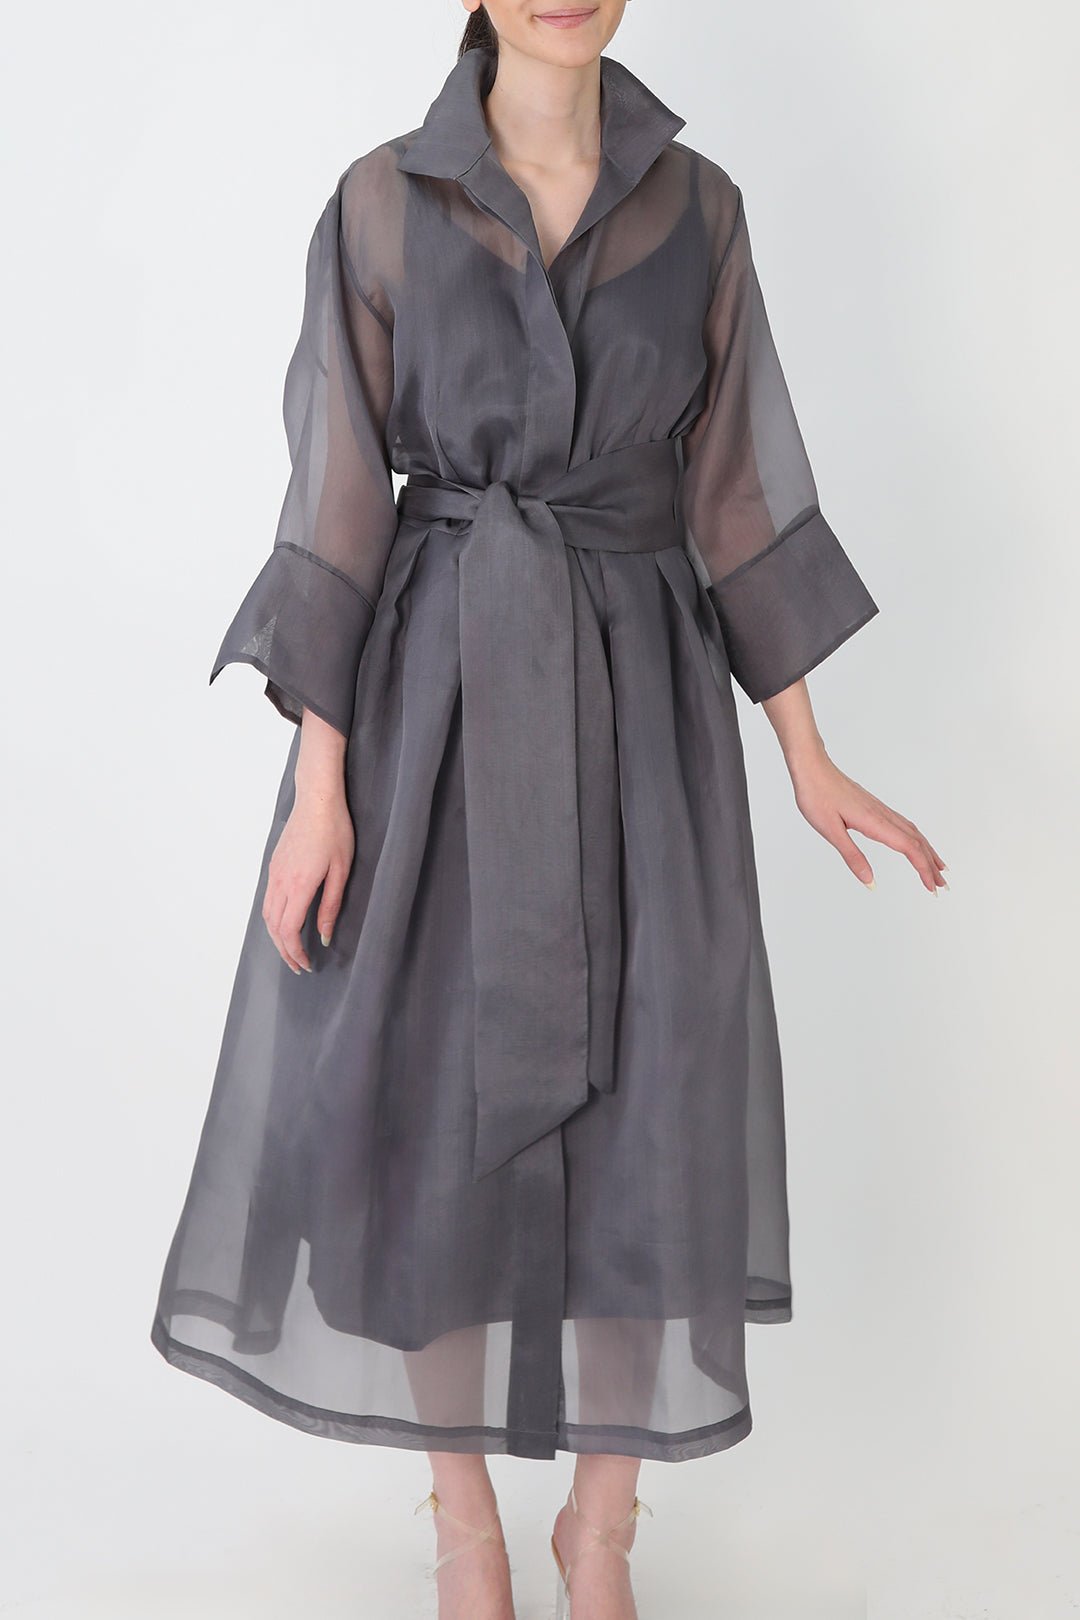 GABRIELLE DRESS IN SILK ORGANZA NAVY - PRE-ORDER AVAILABLE - Jarbo